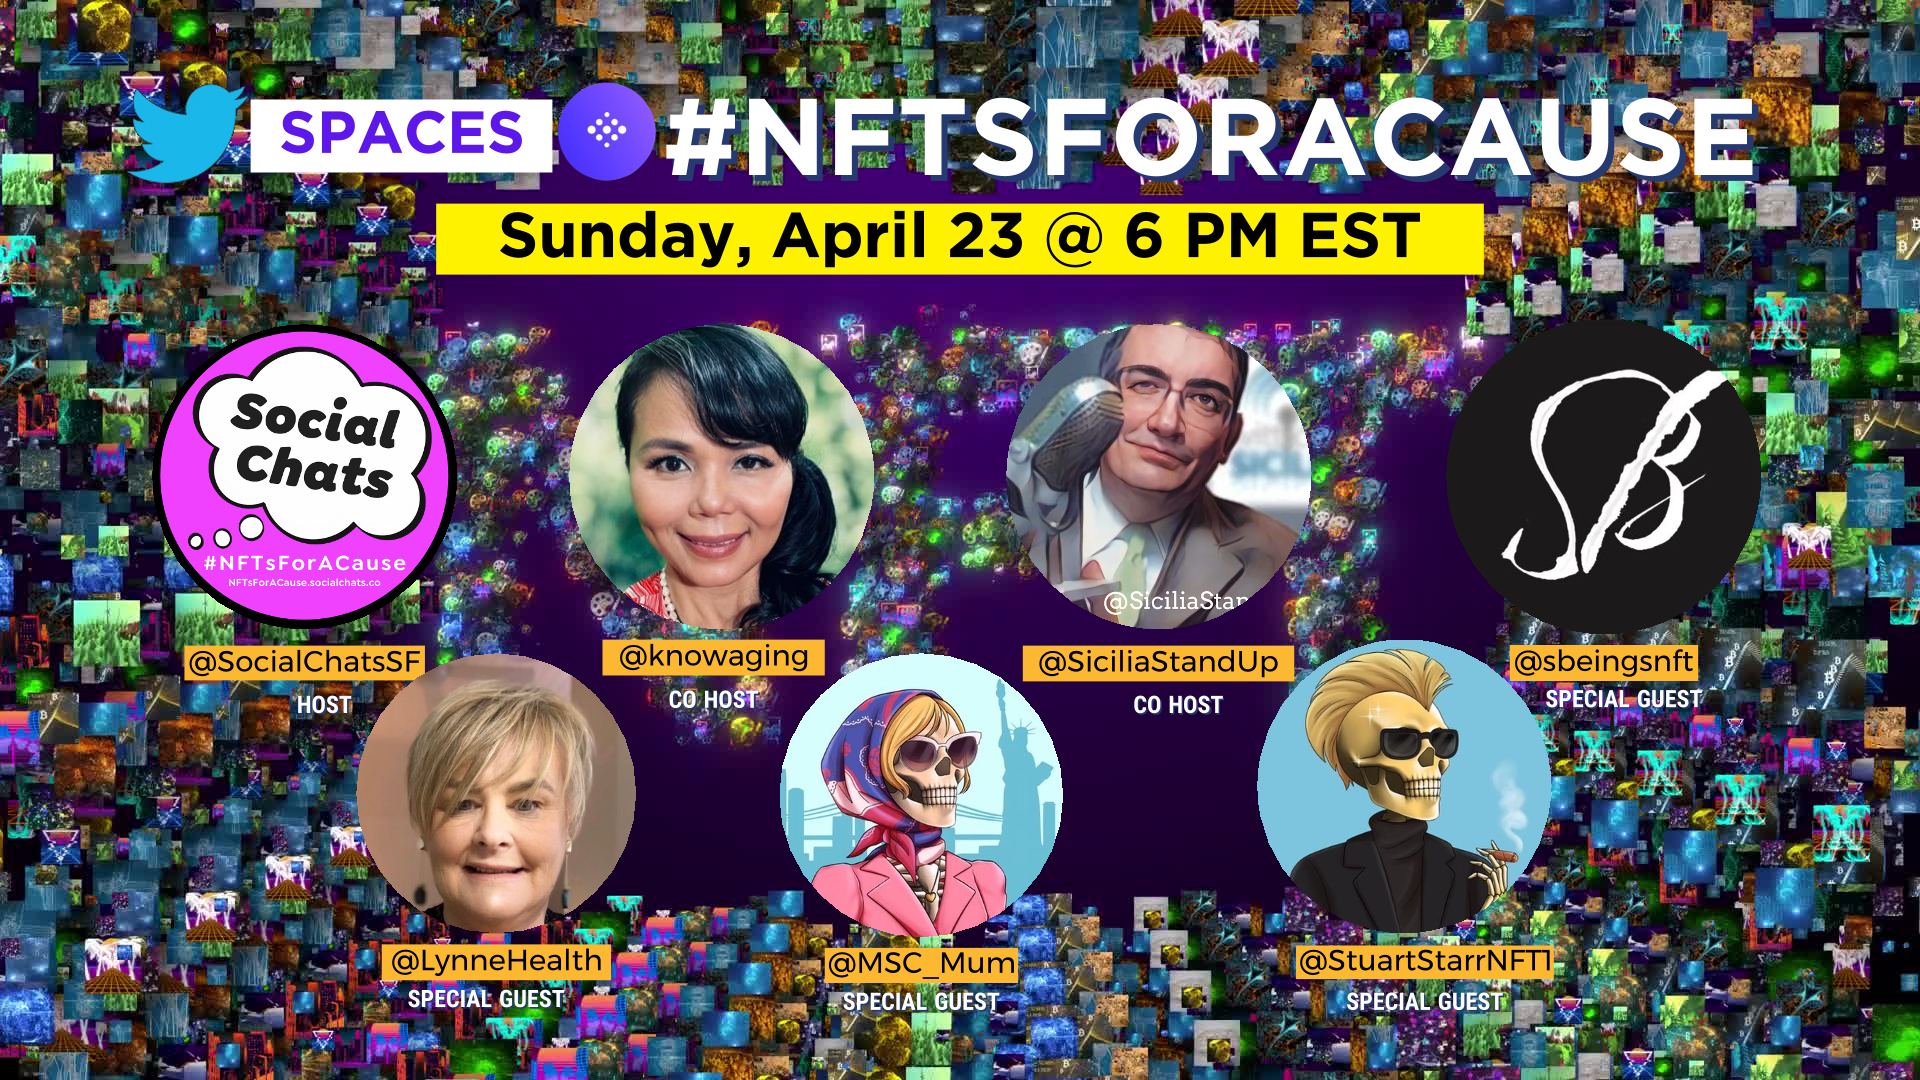 #NFTsForACause: Chat w/ the team of @sbeingsNFT about donating 33% of proceeds to @TheKingsCollege.